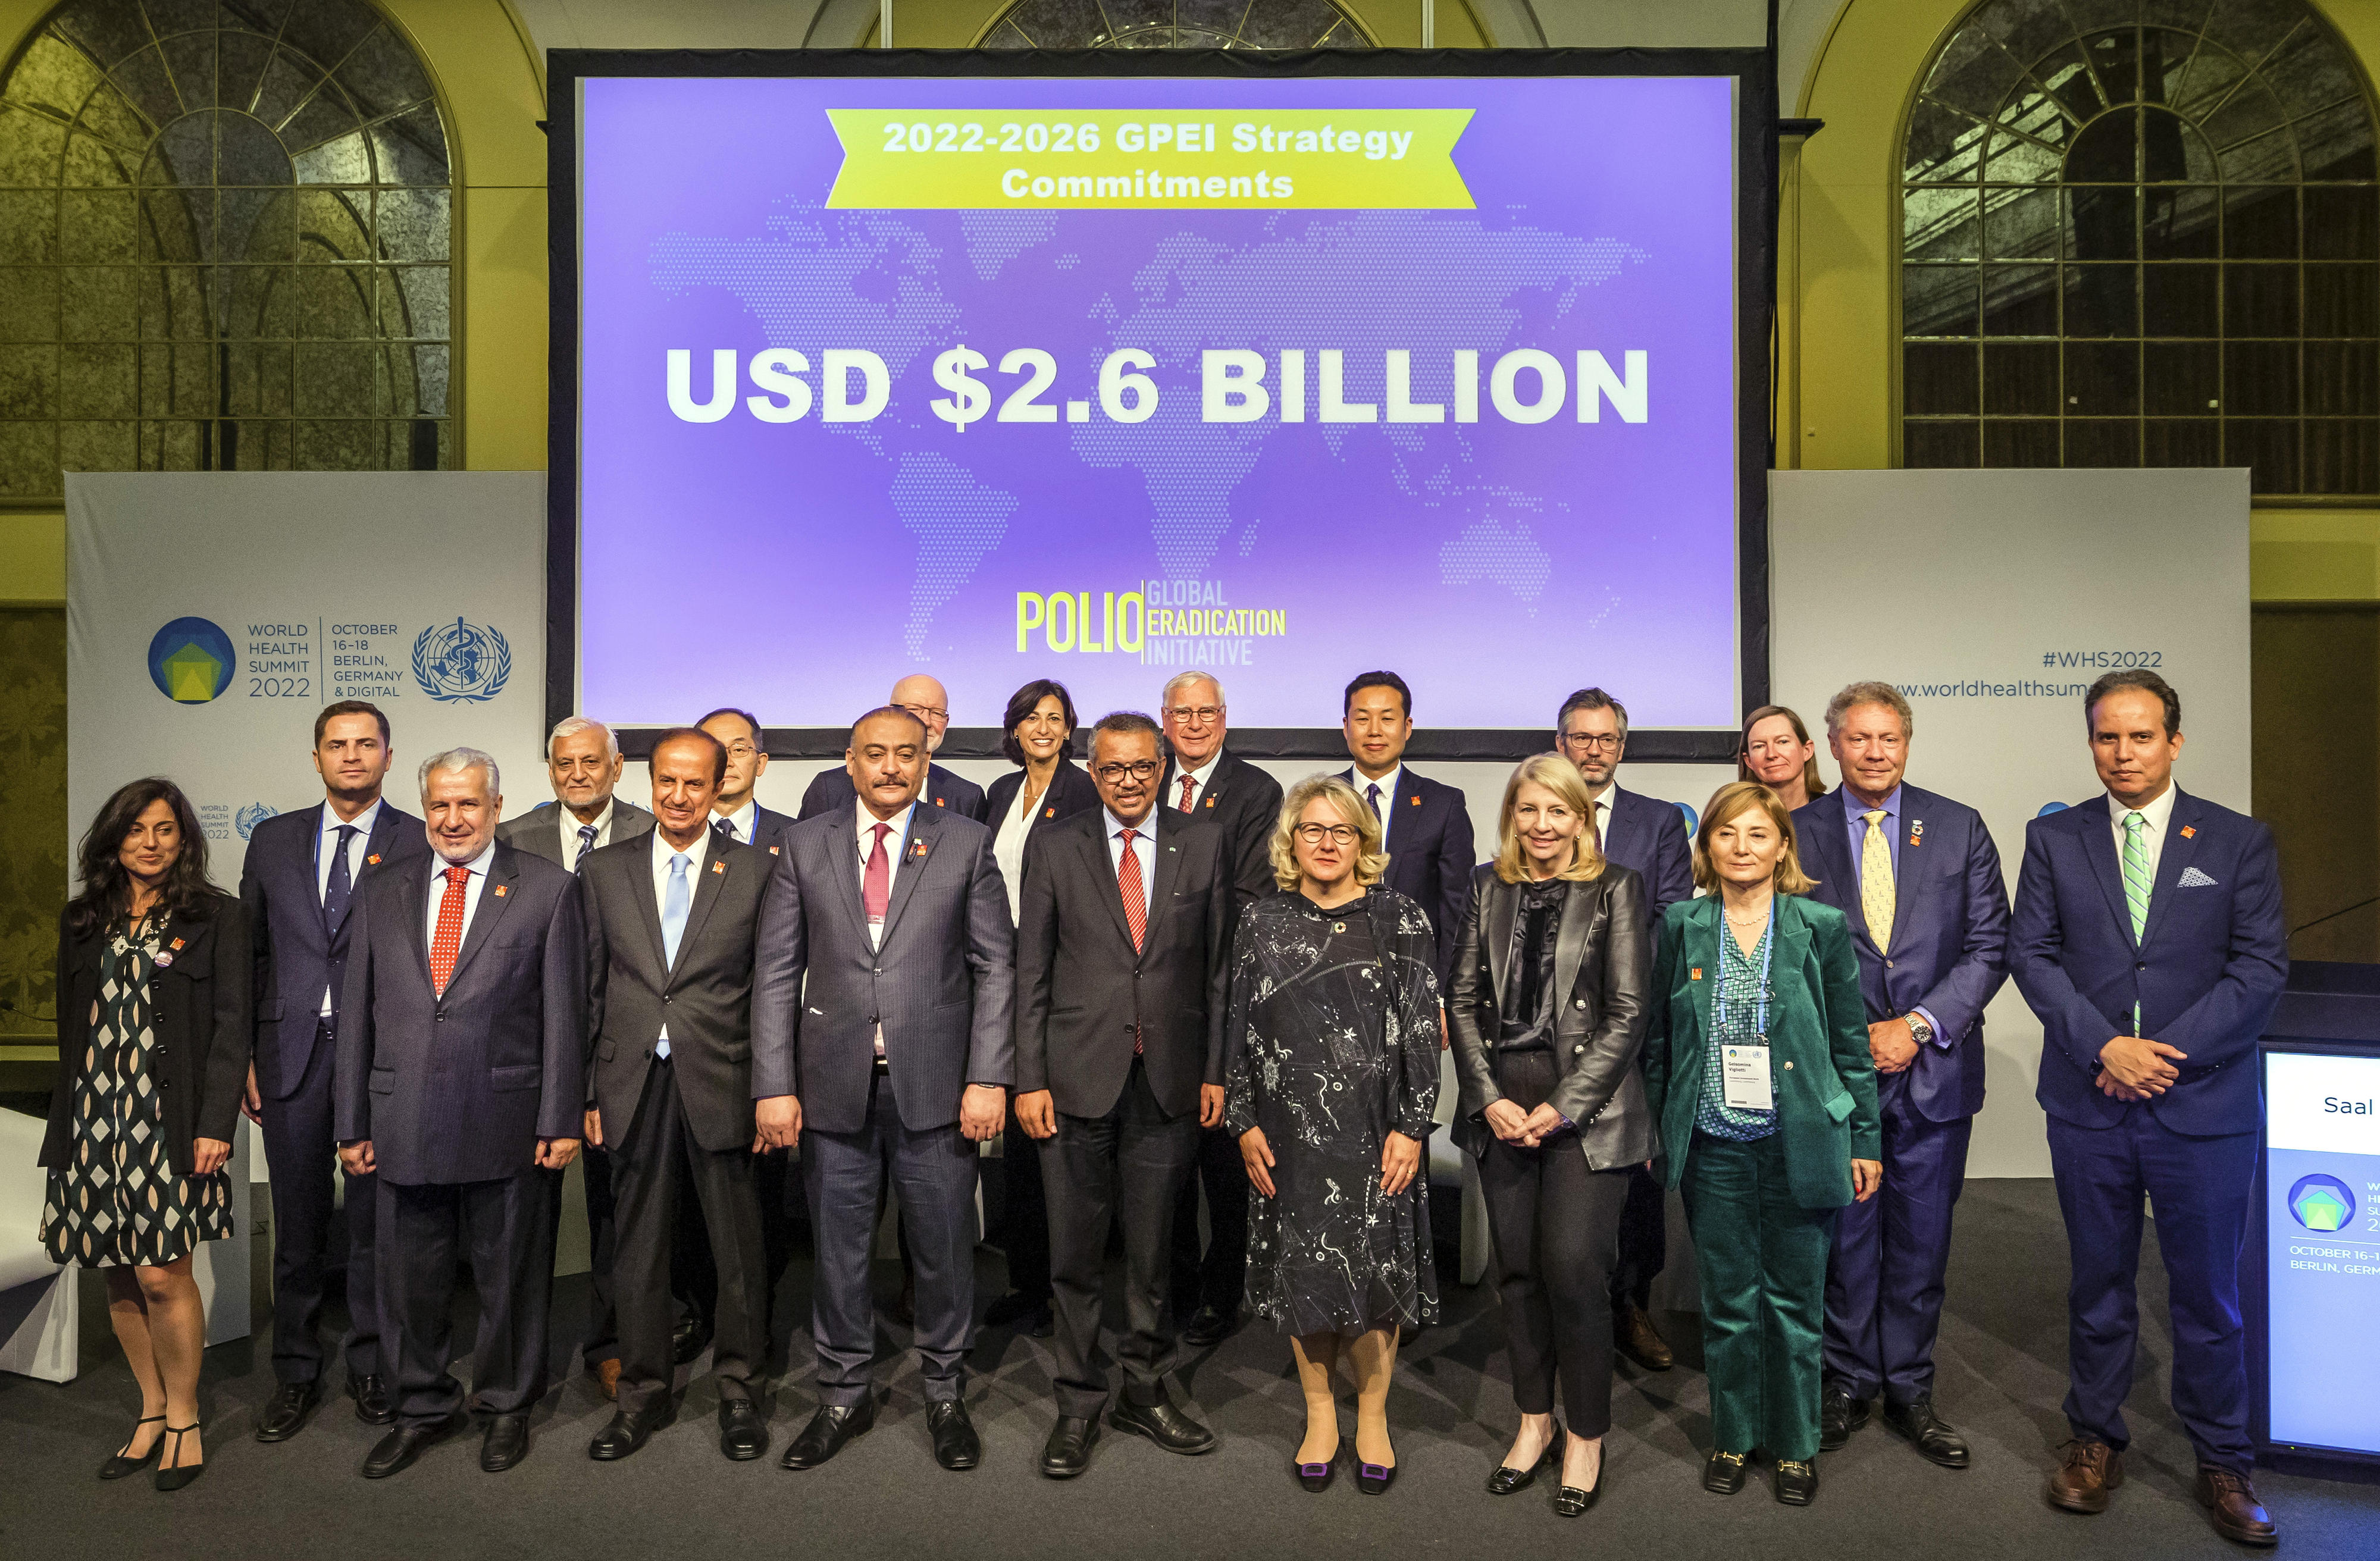 Group photo with participants of the donor conference for the Global Polio Eradication Initiative (GPEI) in Berlin